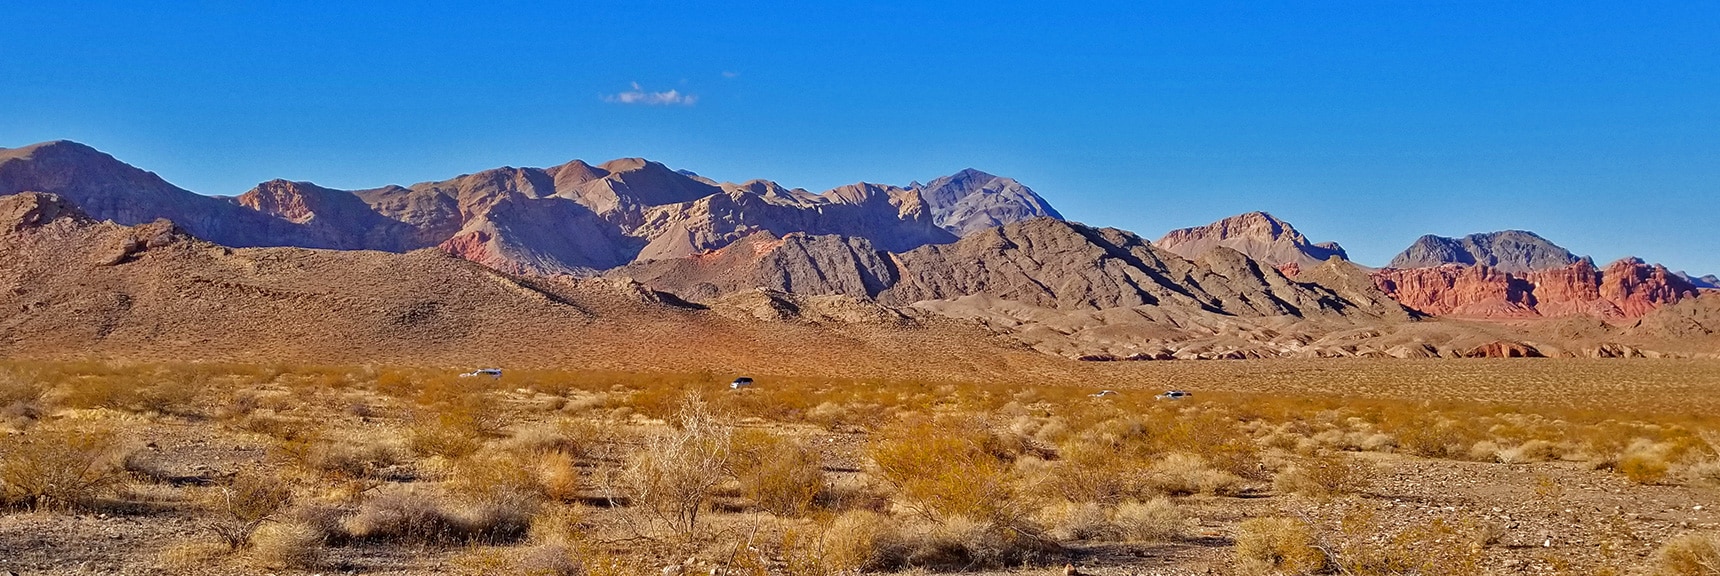 Muddy Mts., Bowl of Fire and Parking Area Across Northshore Near Mile 18 | Hamblin Mountain, Lake Mead National Conservation Area, Nevada